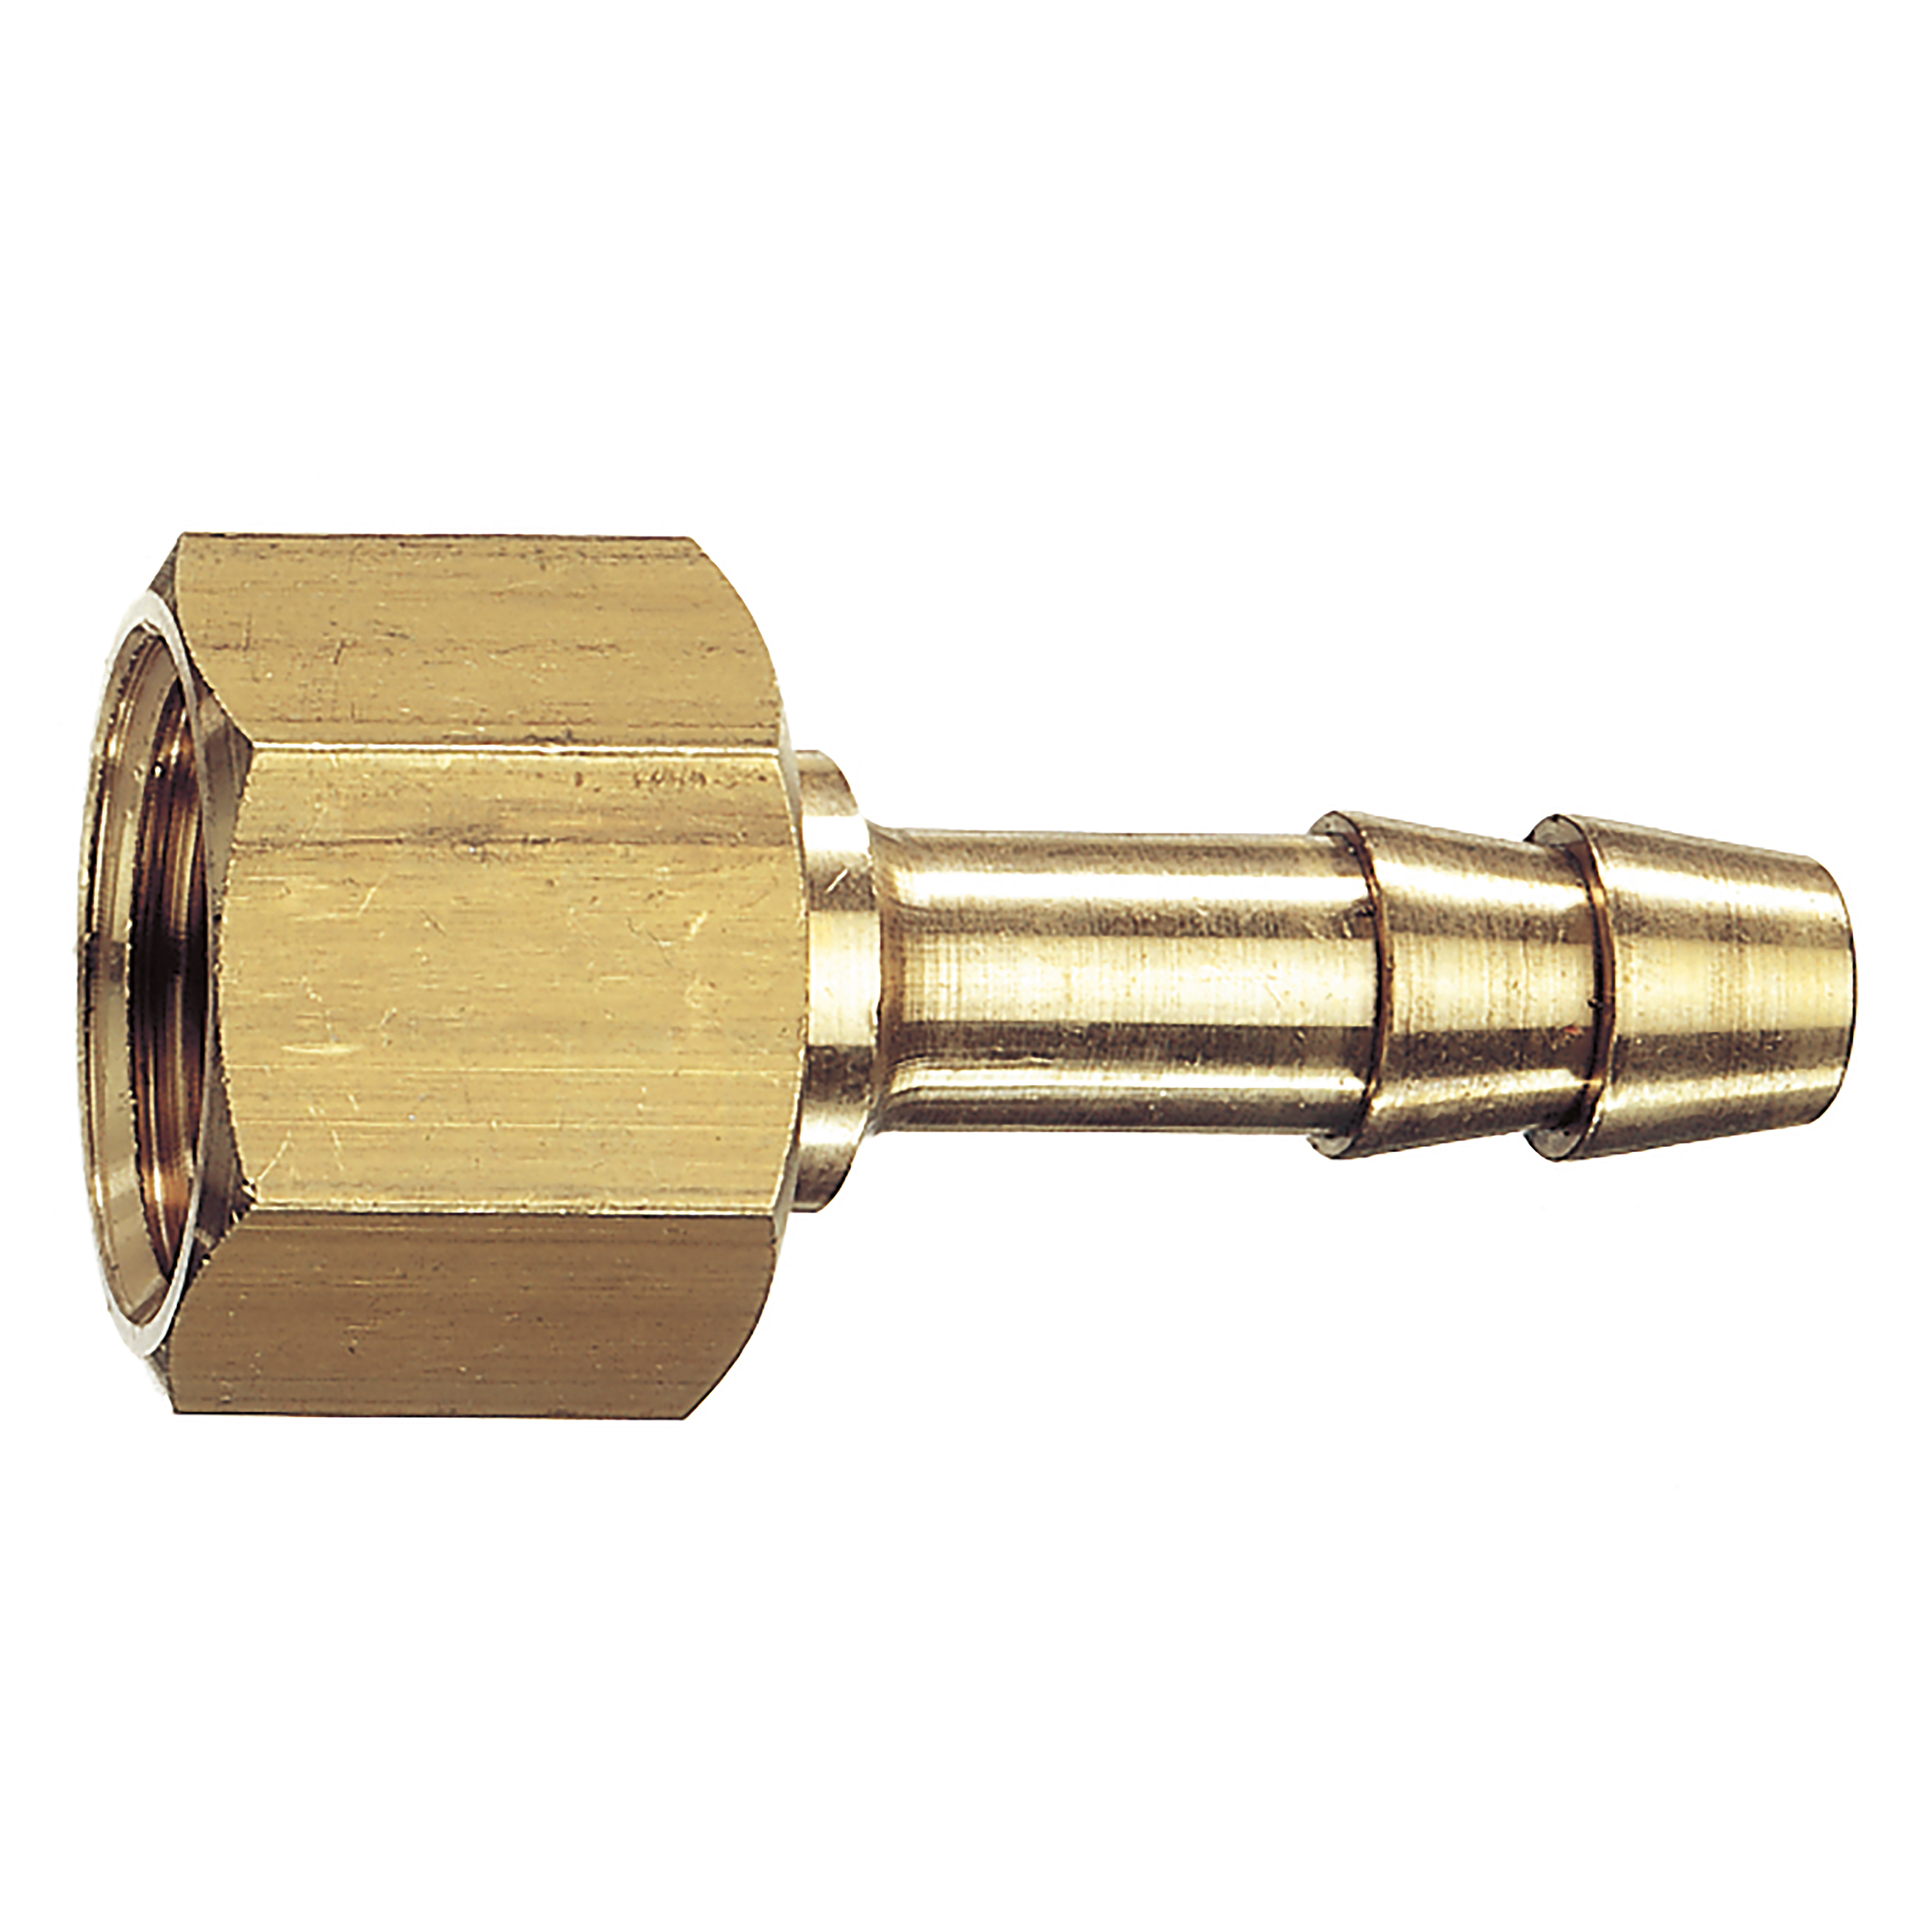 Hose fitting, detachable, connection thread: G¼, hose width: DN 6, hose nozzle with ball plug